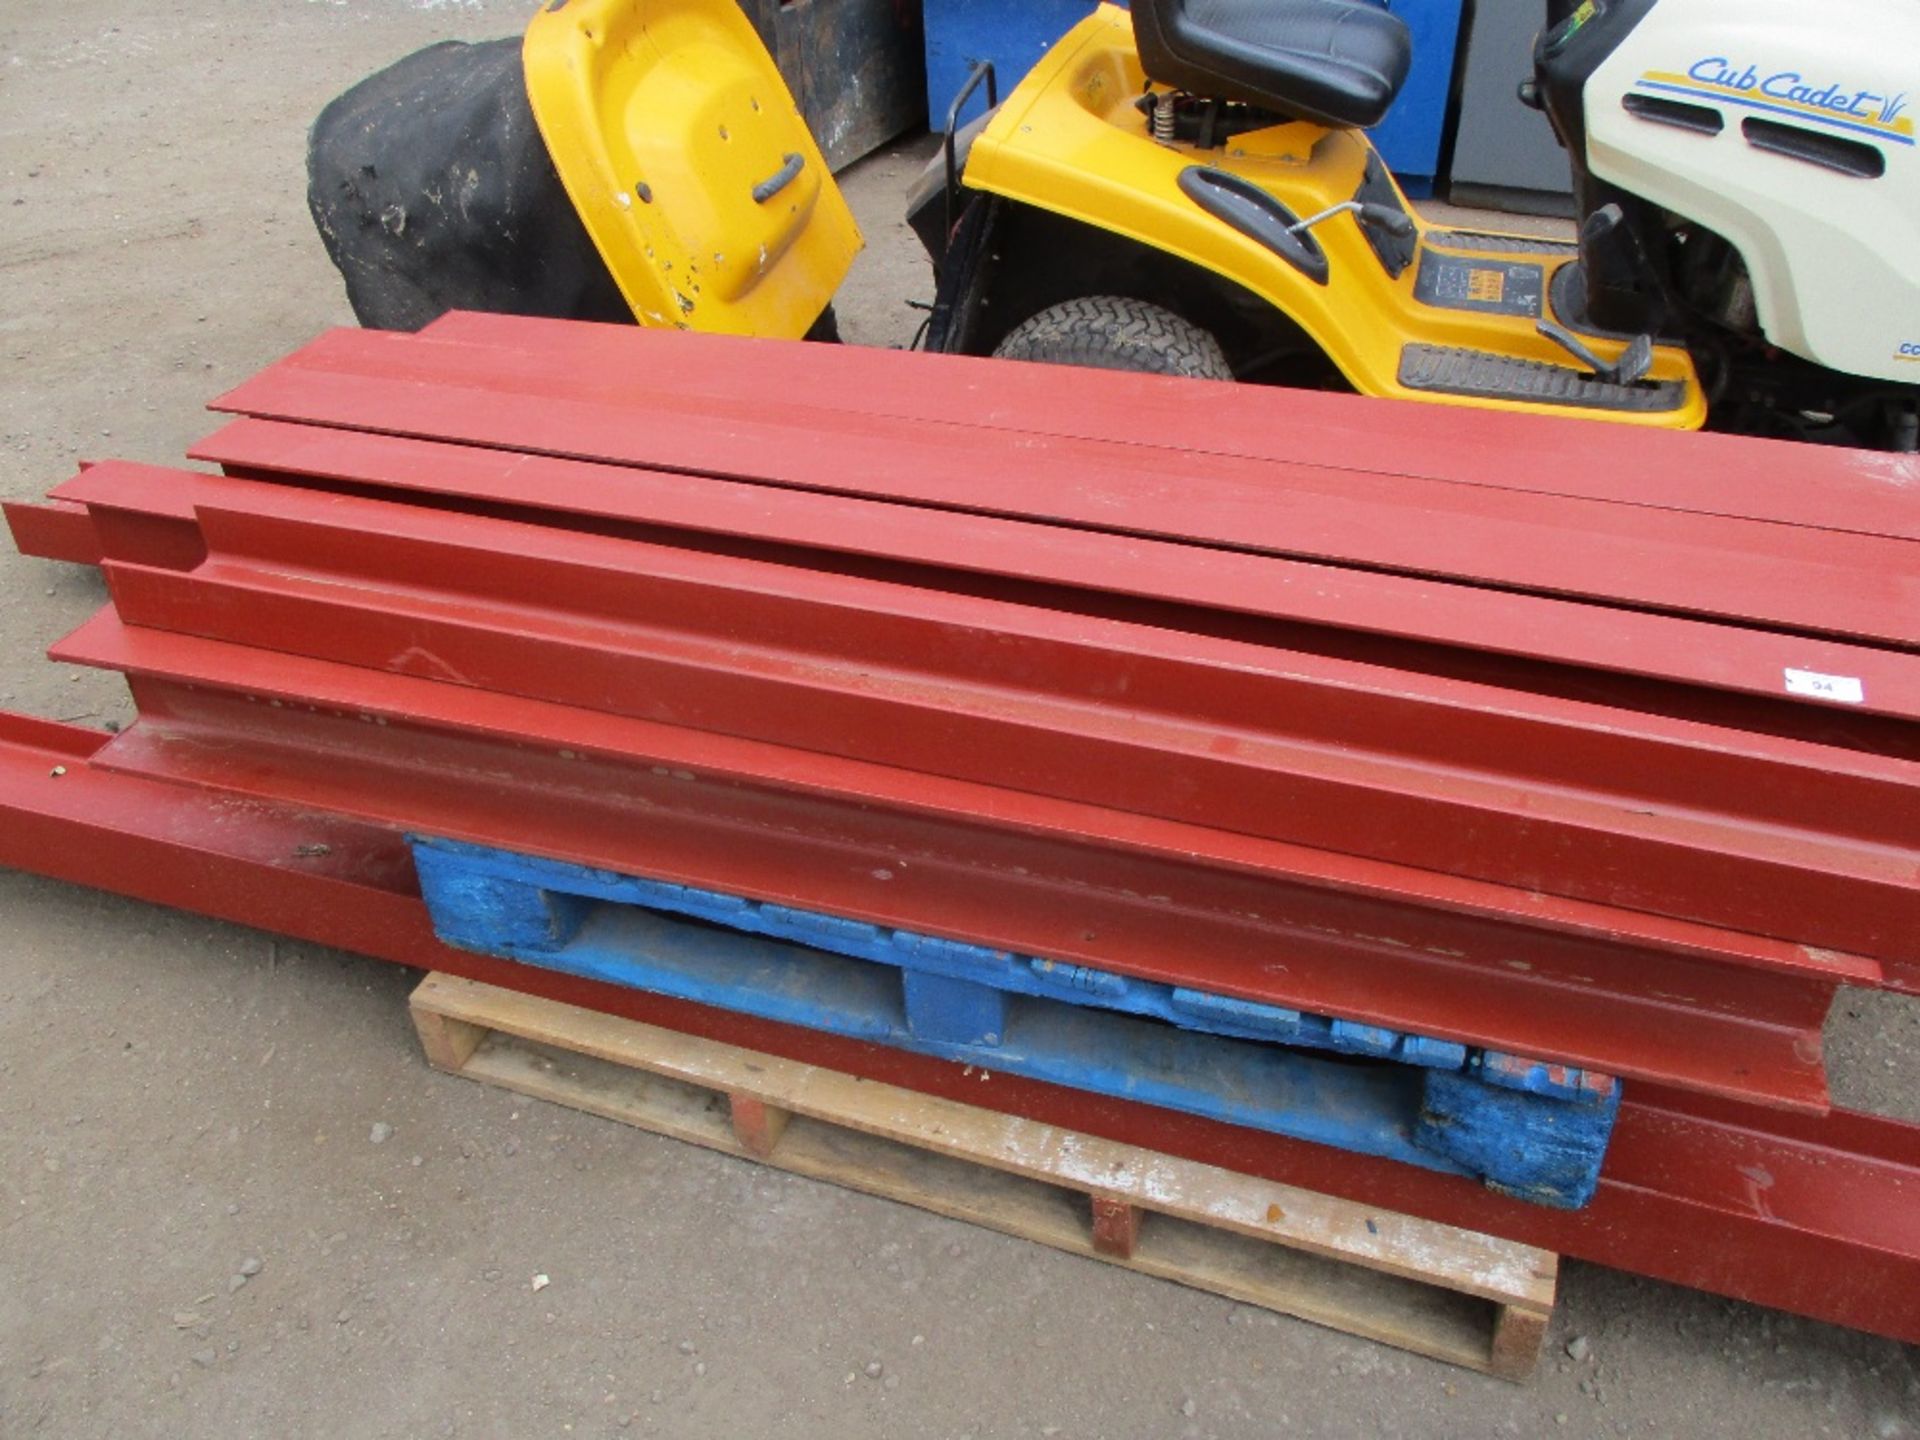 2 PALLETS CONTAINING RSJ AND CHANNEL STEELS RANGING FROM 6-12FT LENGTH APPROX NO VAT ON HAMMER PRI - Image 2 of 2